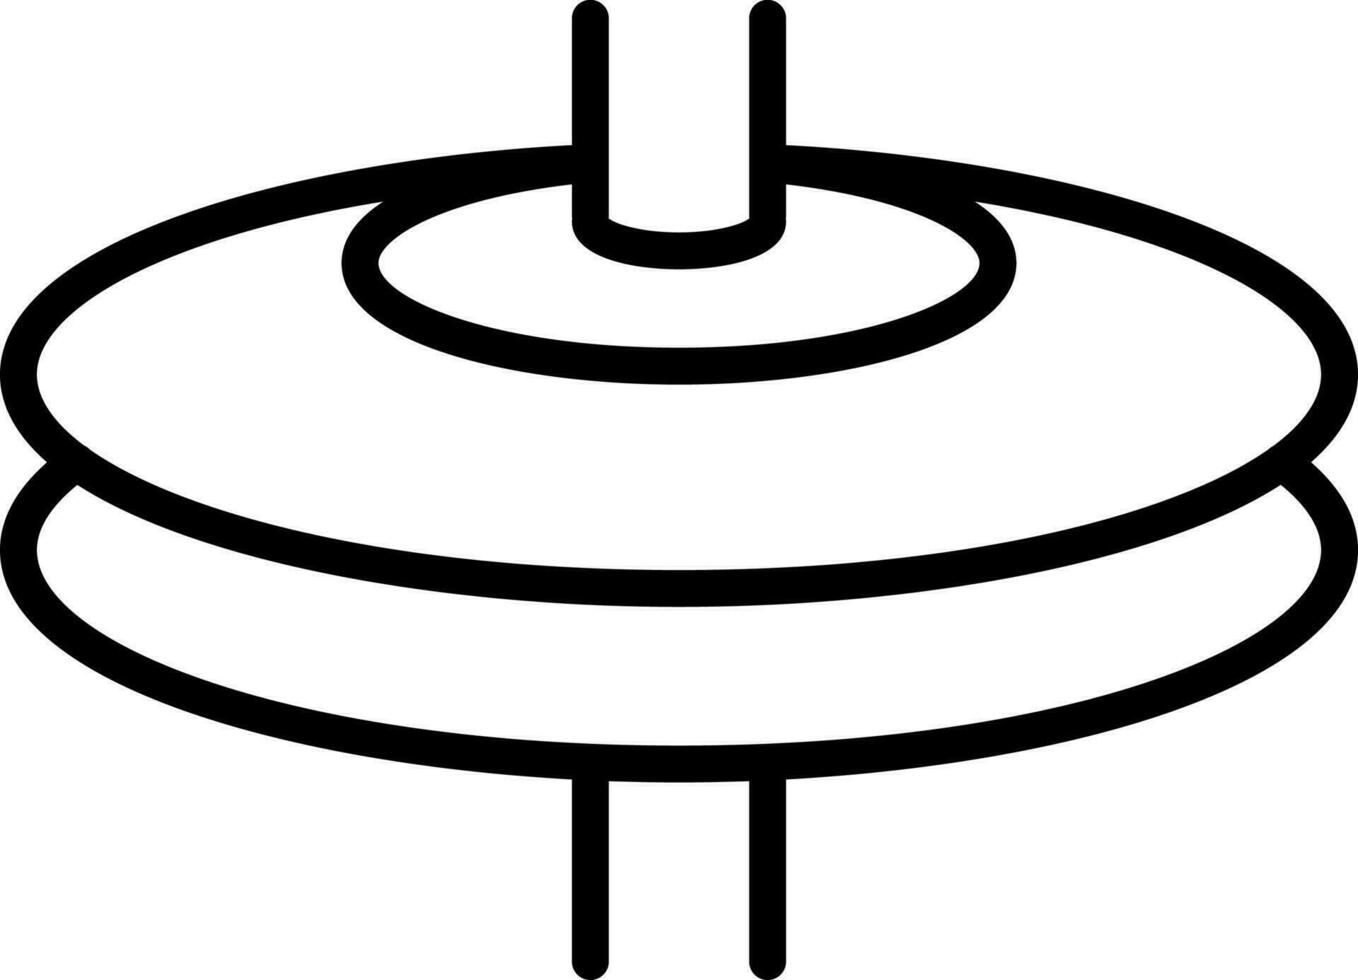 Isolated cymbals icon in line art. vector